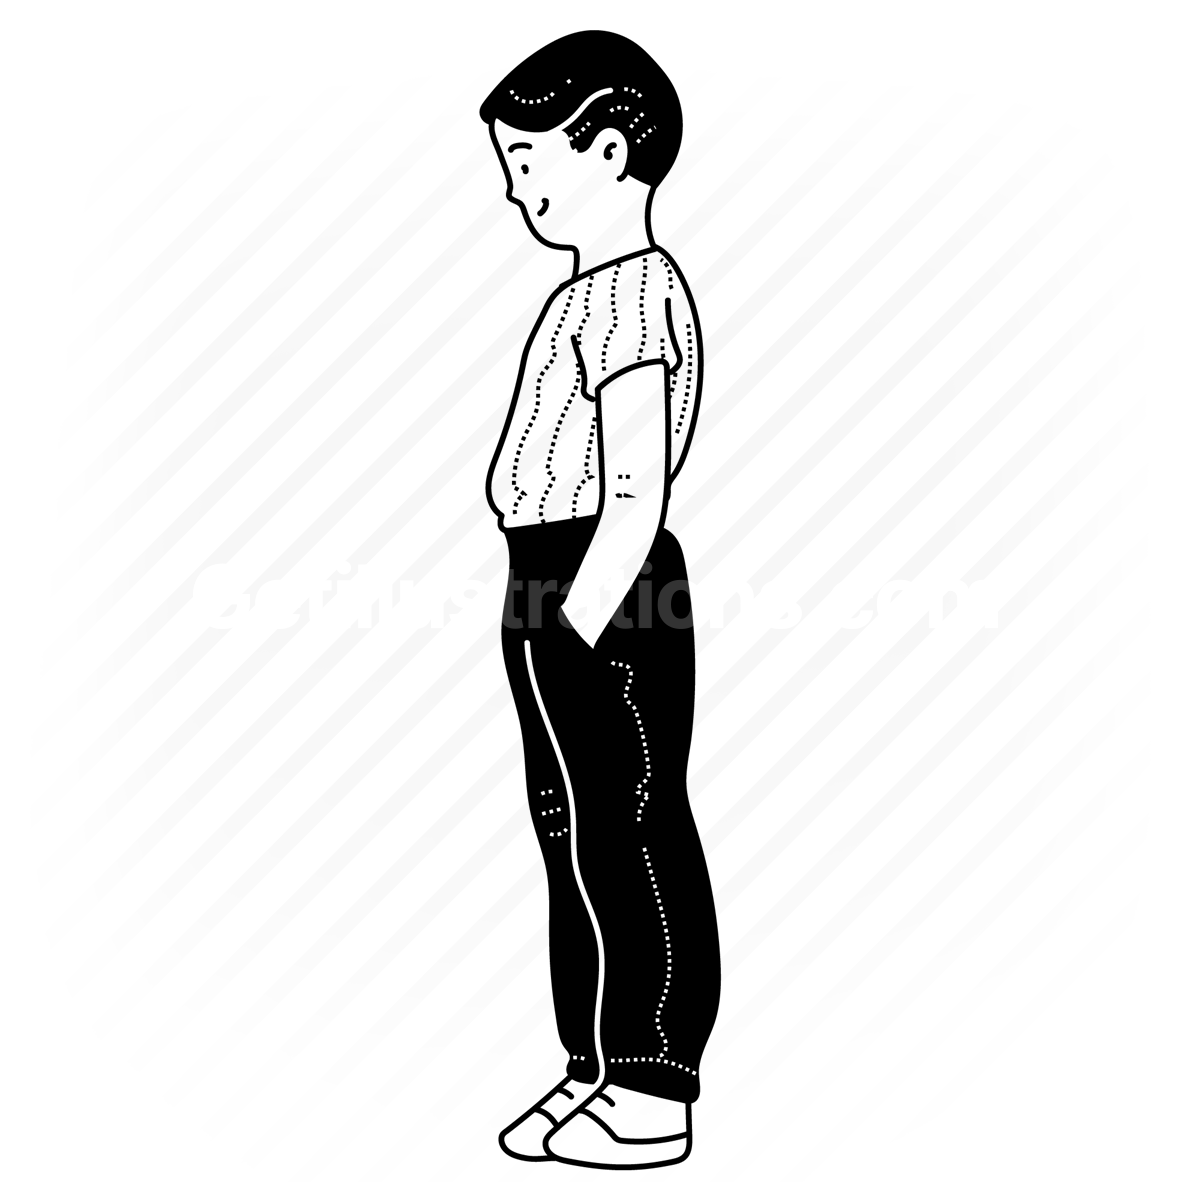 standing, hands in pockets, pockets, child, boy, male